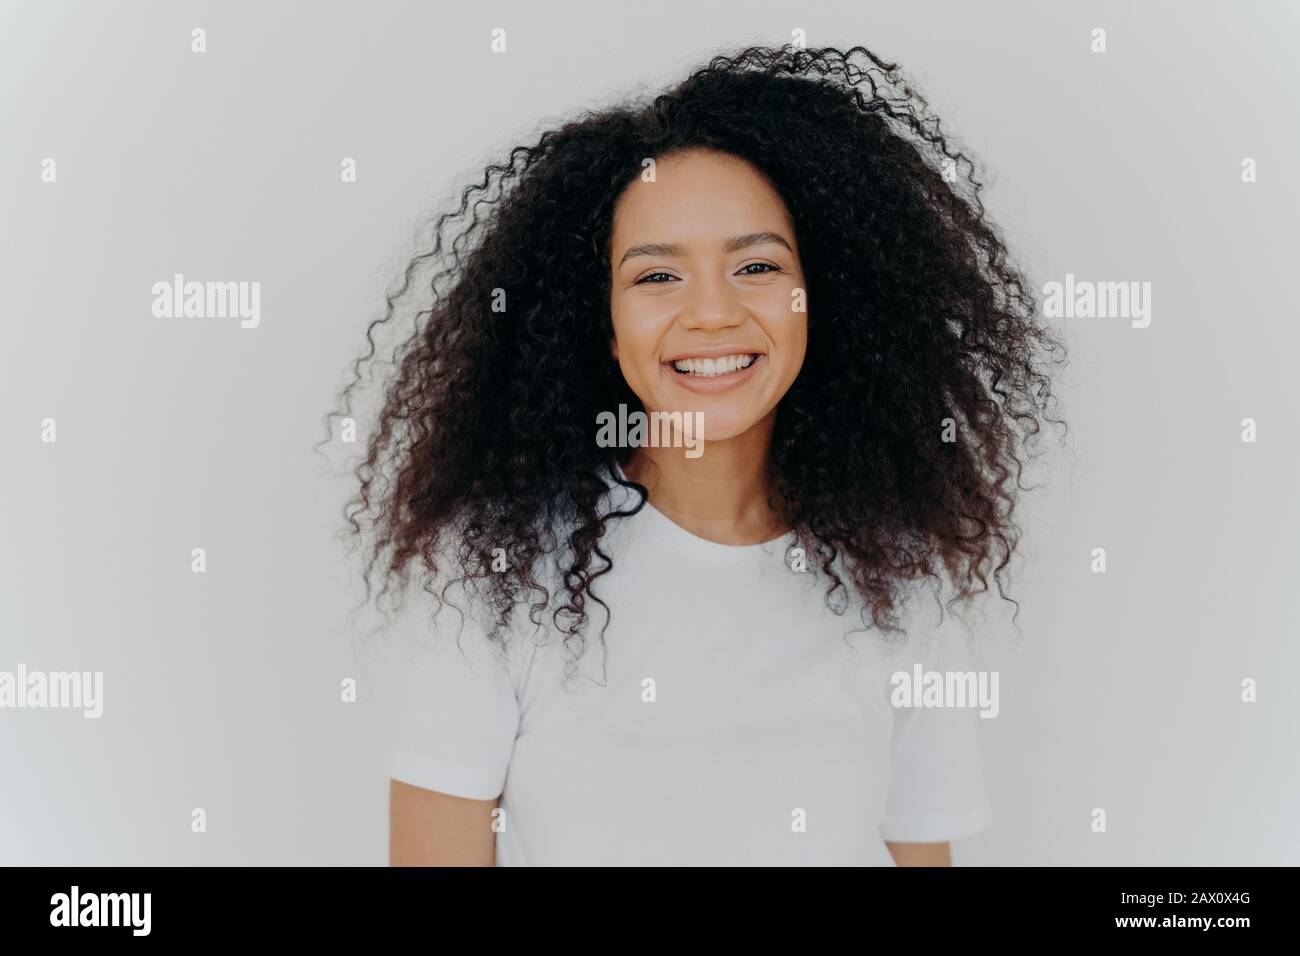 Pleasant looking young woman has toothy smile, happy face expression, laughs at something funny, shows white perfect teeth, dressed casually, isolated Stock Photo